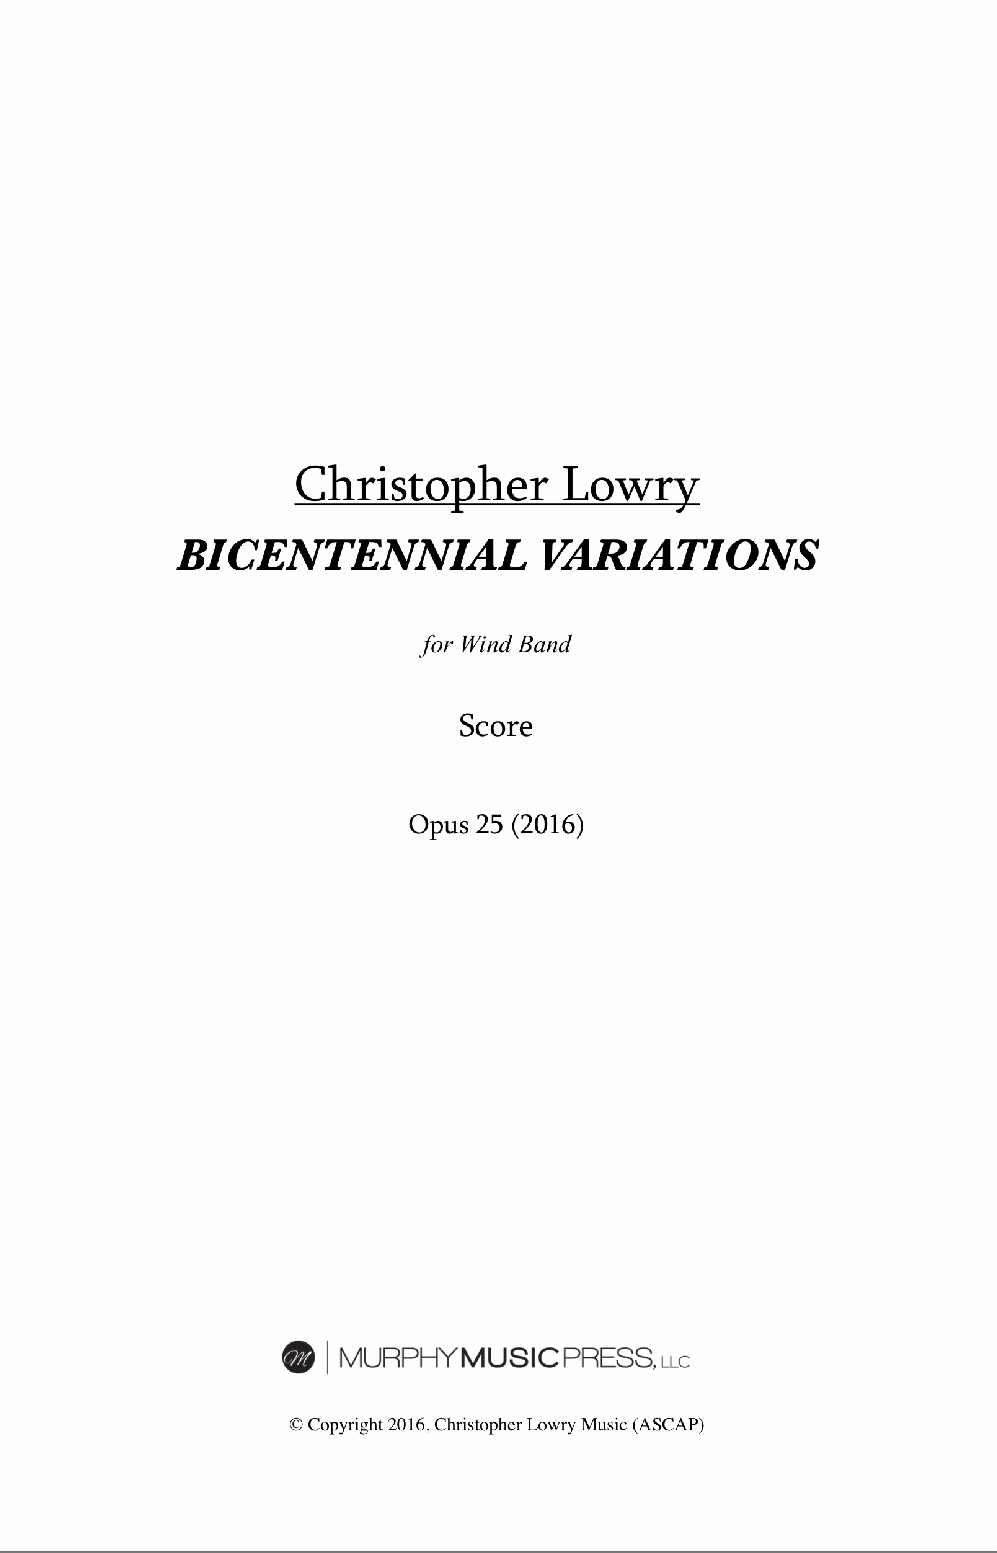 Bicentennial Variations  by Christopher Lowry